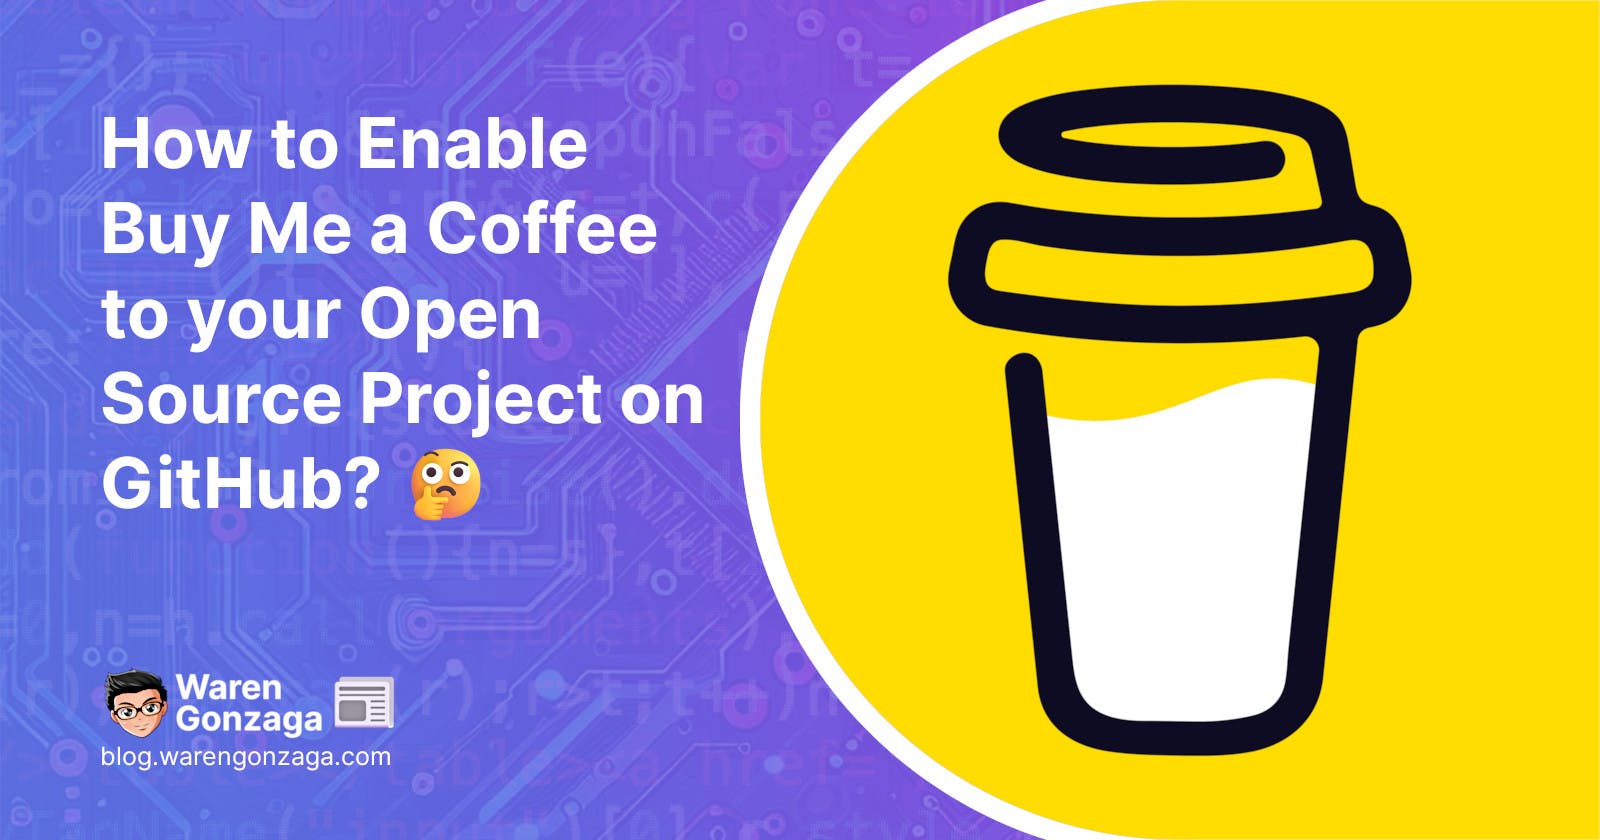 How to Enable Buy Me a Coffee to your Open Source Project on GitHub